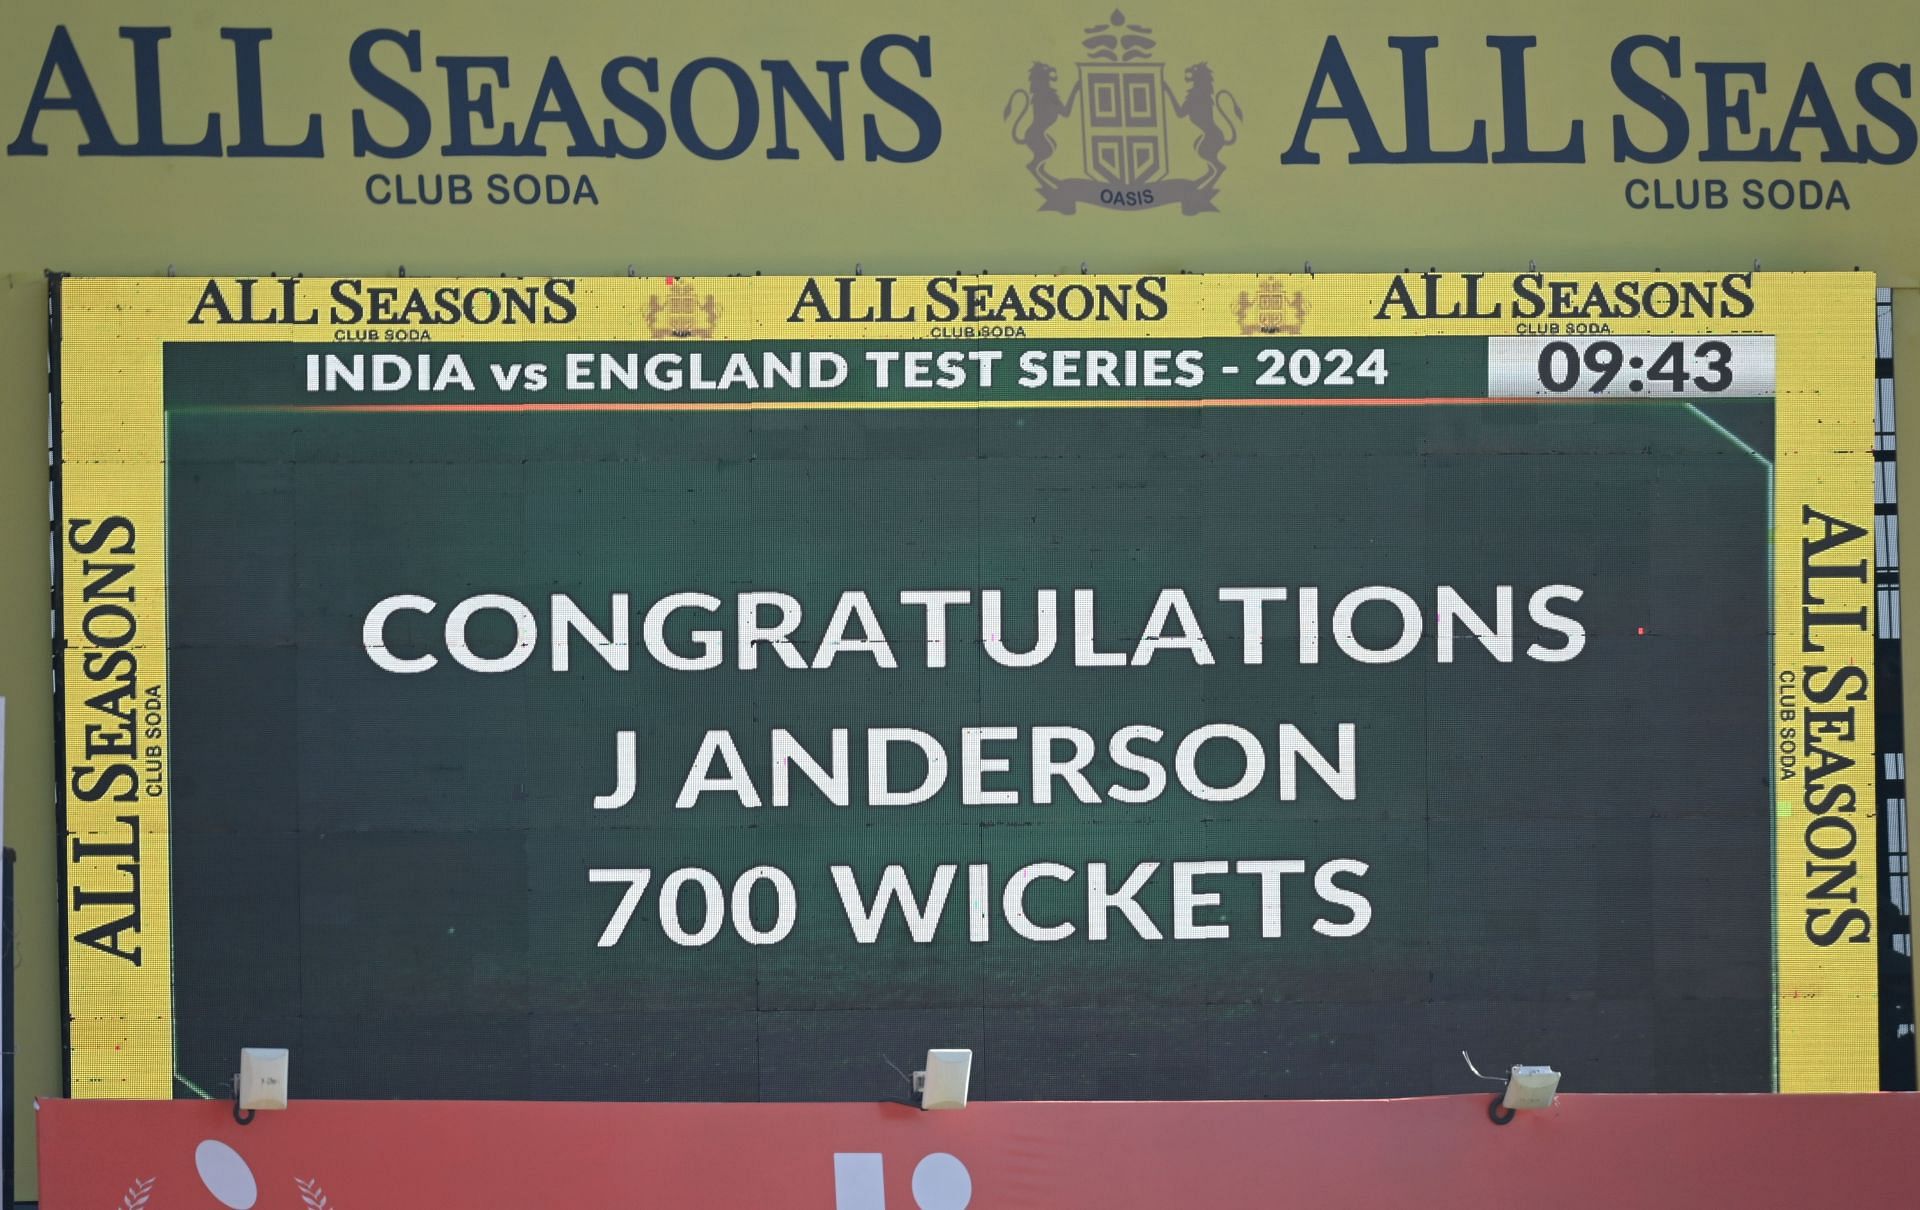 James Anderson became the first pacer to complete 700 Test wickets. (Image: Getty)